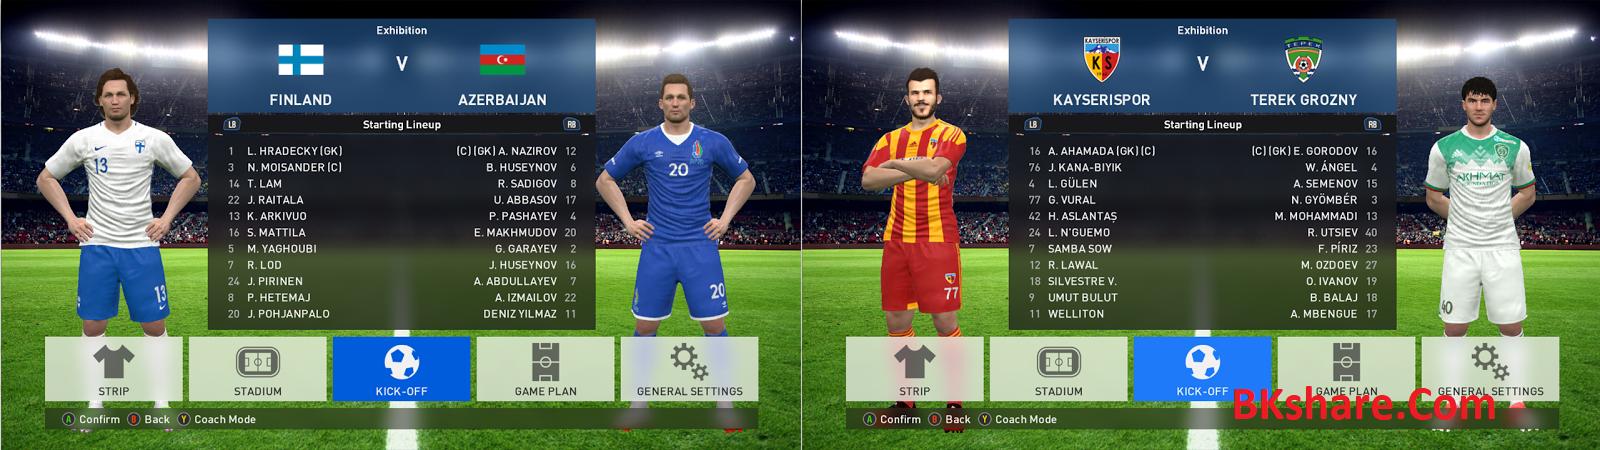 Download PES 2017 SMoKE Patch 9.4 AIO – Patch PES 2017 mới nhất